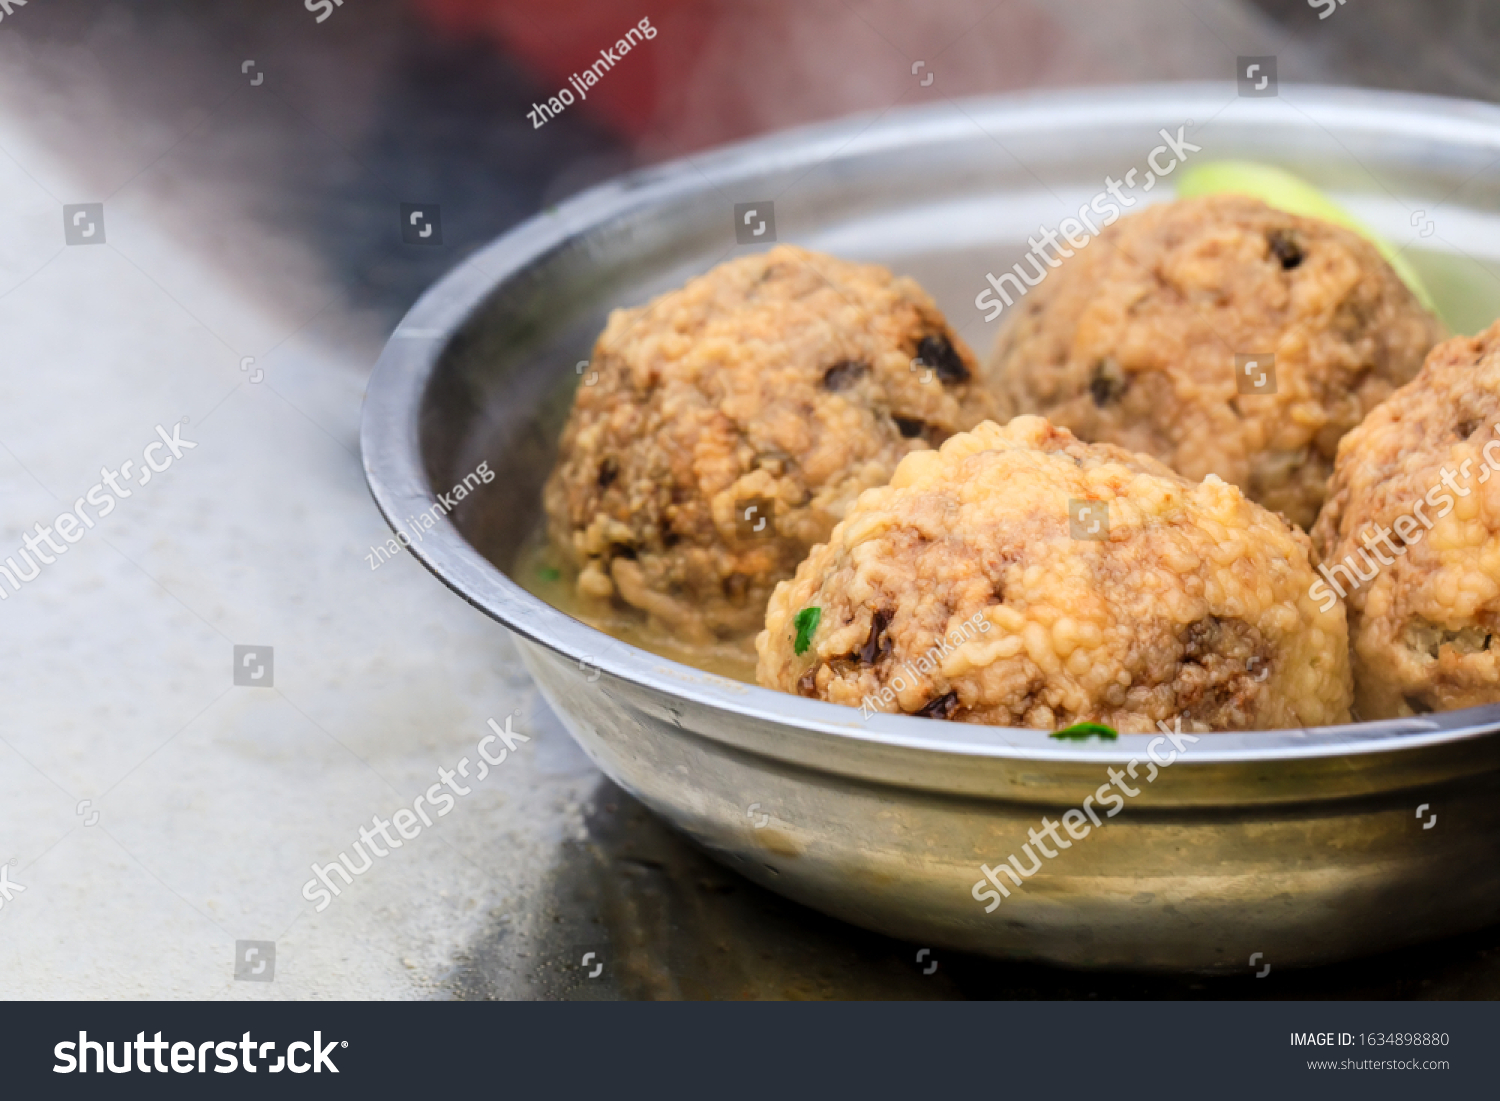 Cooked deep-fried meatballs made from cooked pork and cooked rice.Chinese food. #1634898880